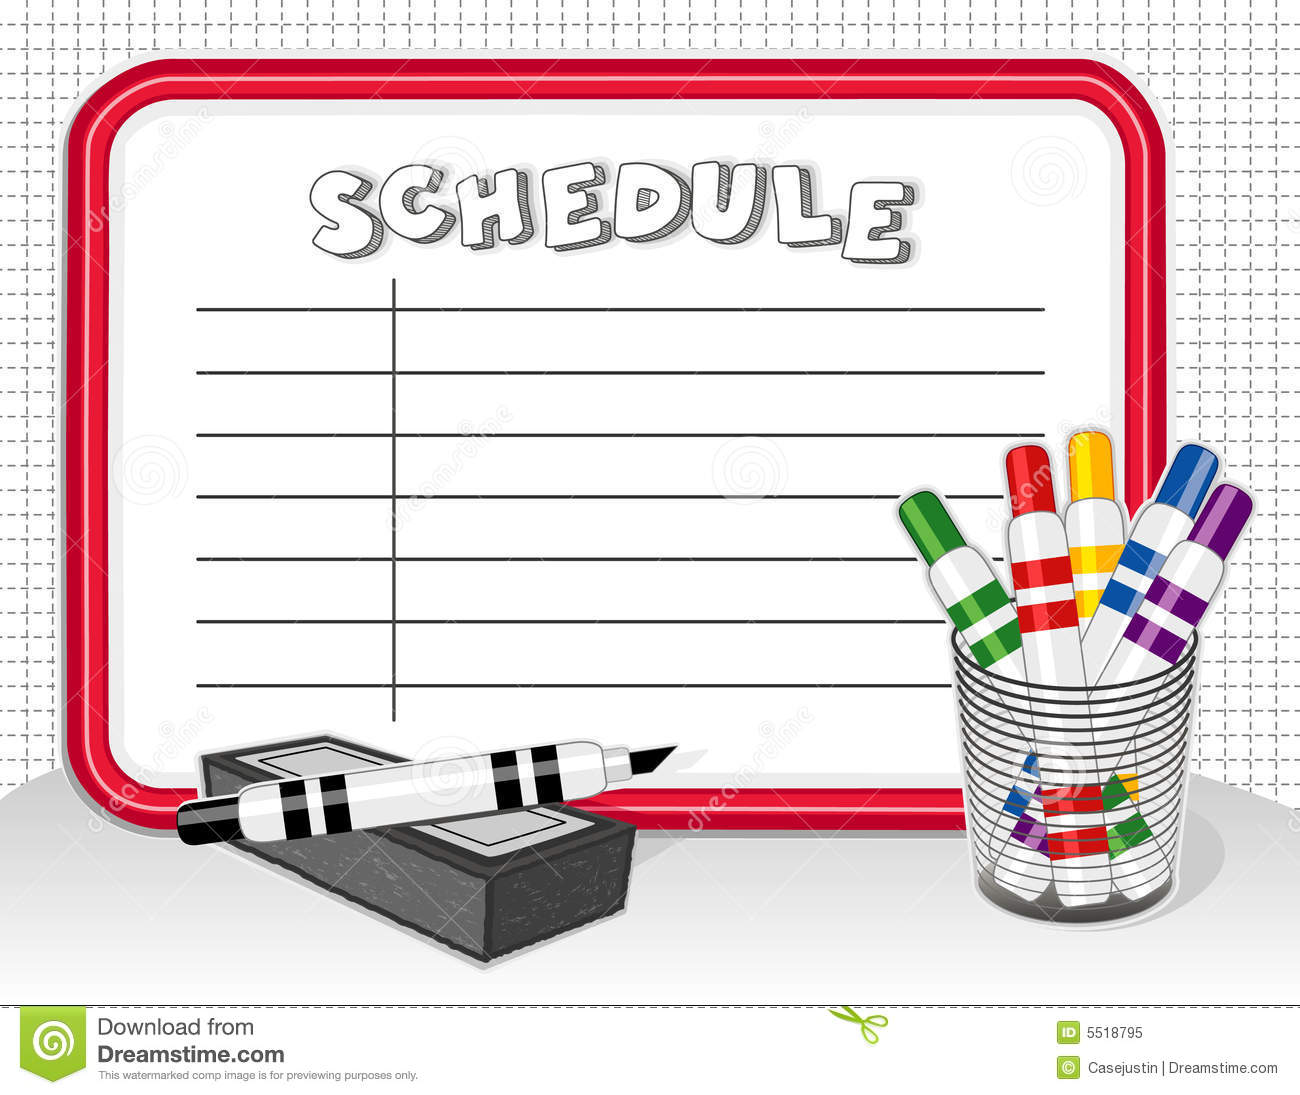 free clipart for preschool daily schedule